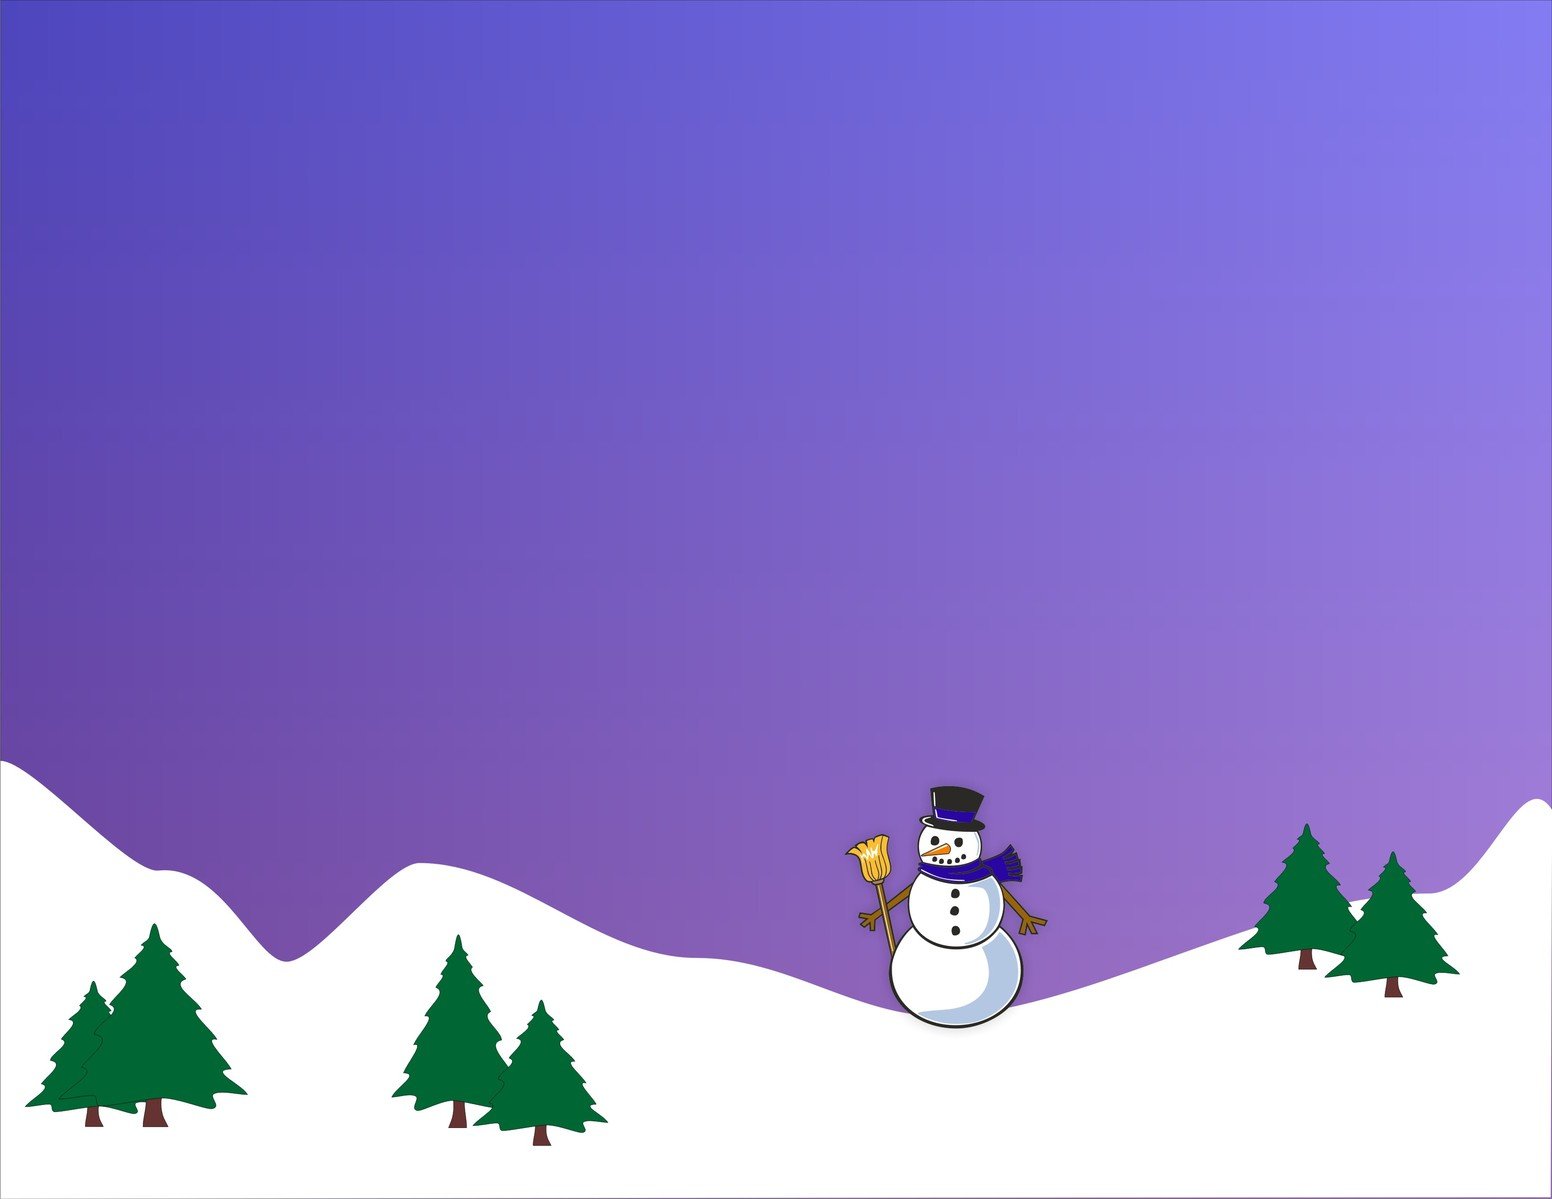 the snowman is in front of some trees